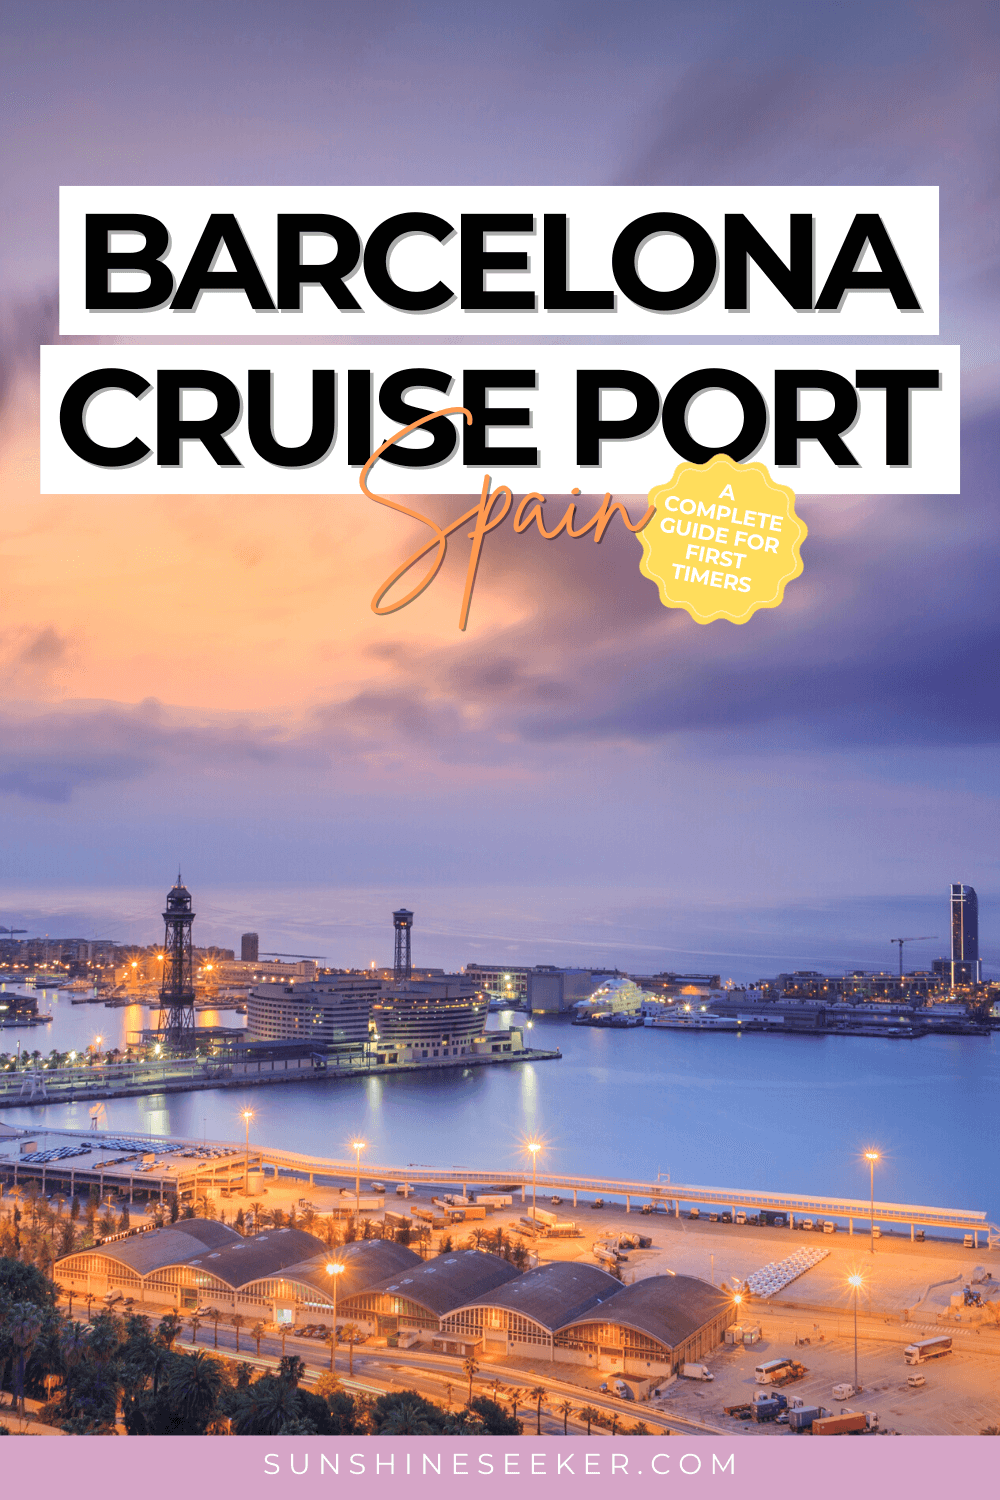 Your complete guide to Barcelona cruise port. The best shore excursions and how to get around Barcelona from the cruise port. Everything you need to know before you dock at Barcelona cruise port.